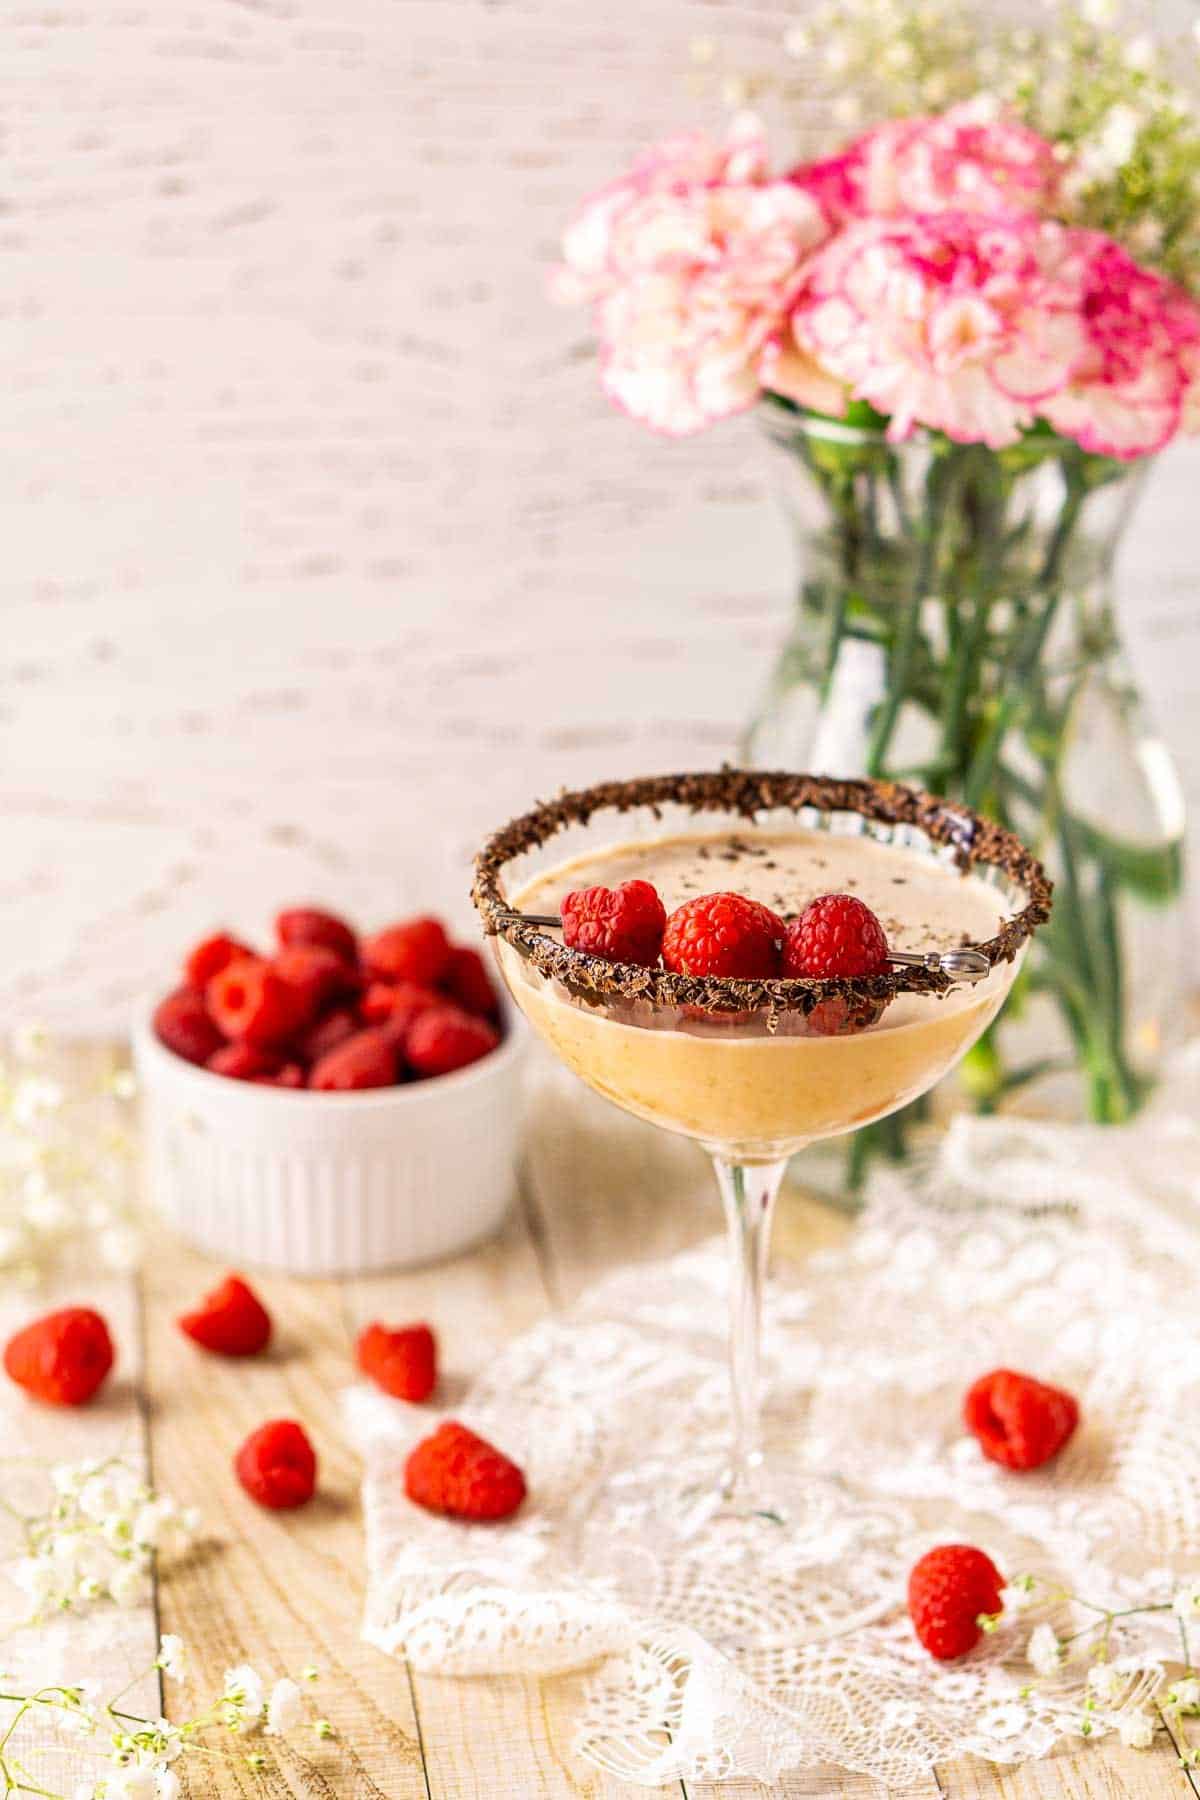 Looking down on a chocolate-raspberry martini on a piece of white lace with a bowl of raspberries and a vase of flowers behind it.